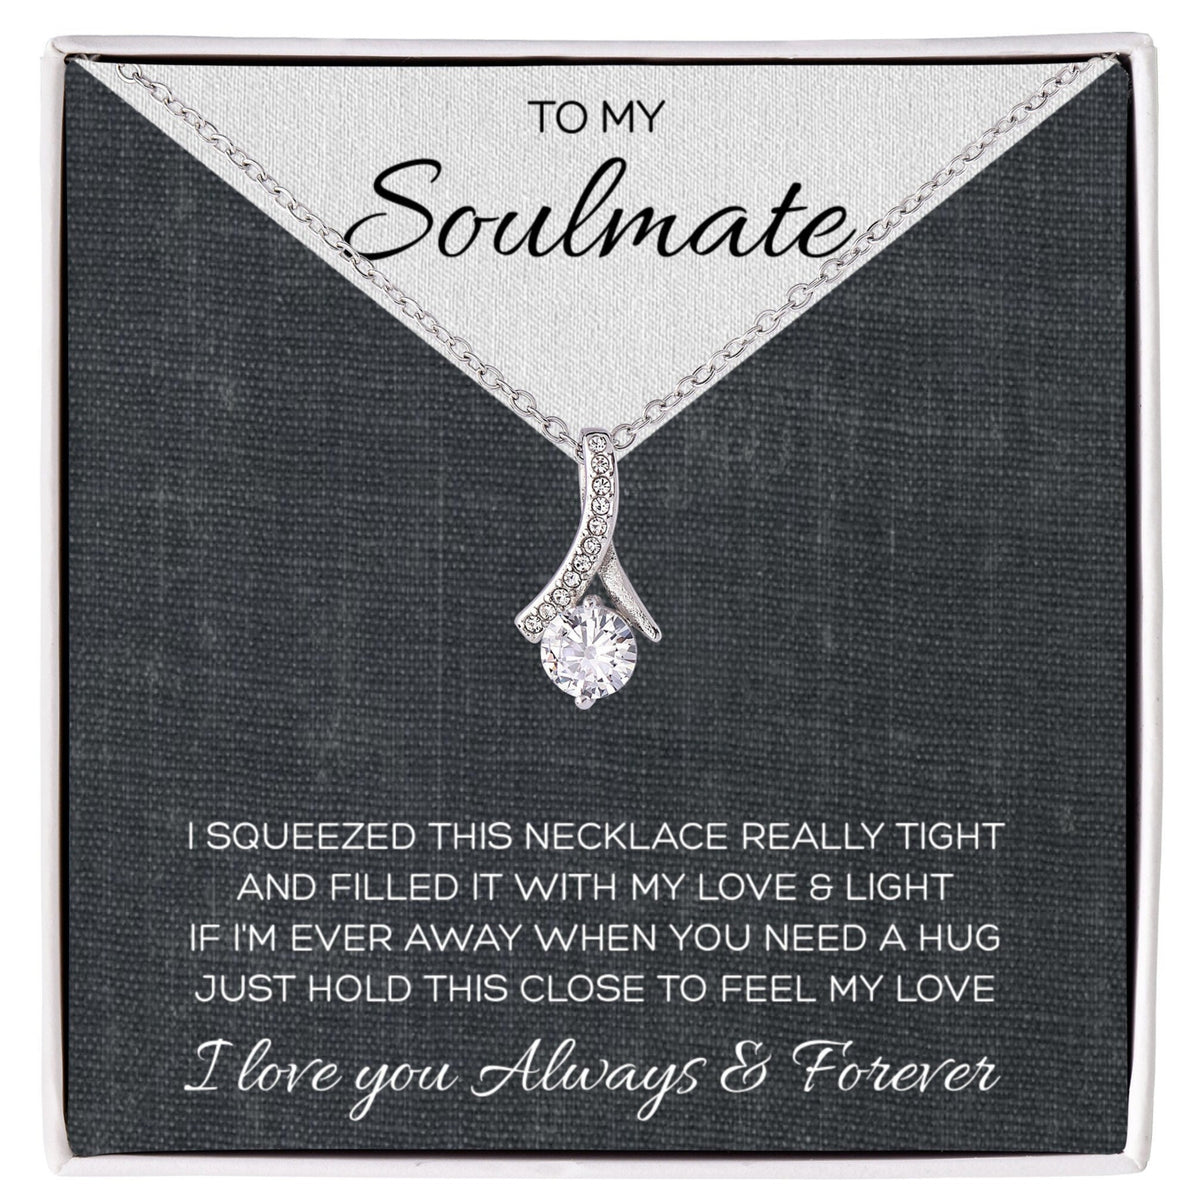 To my soulmate Necklace with Card, Romantic Anniversary Gift for Her